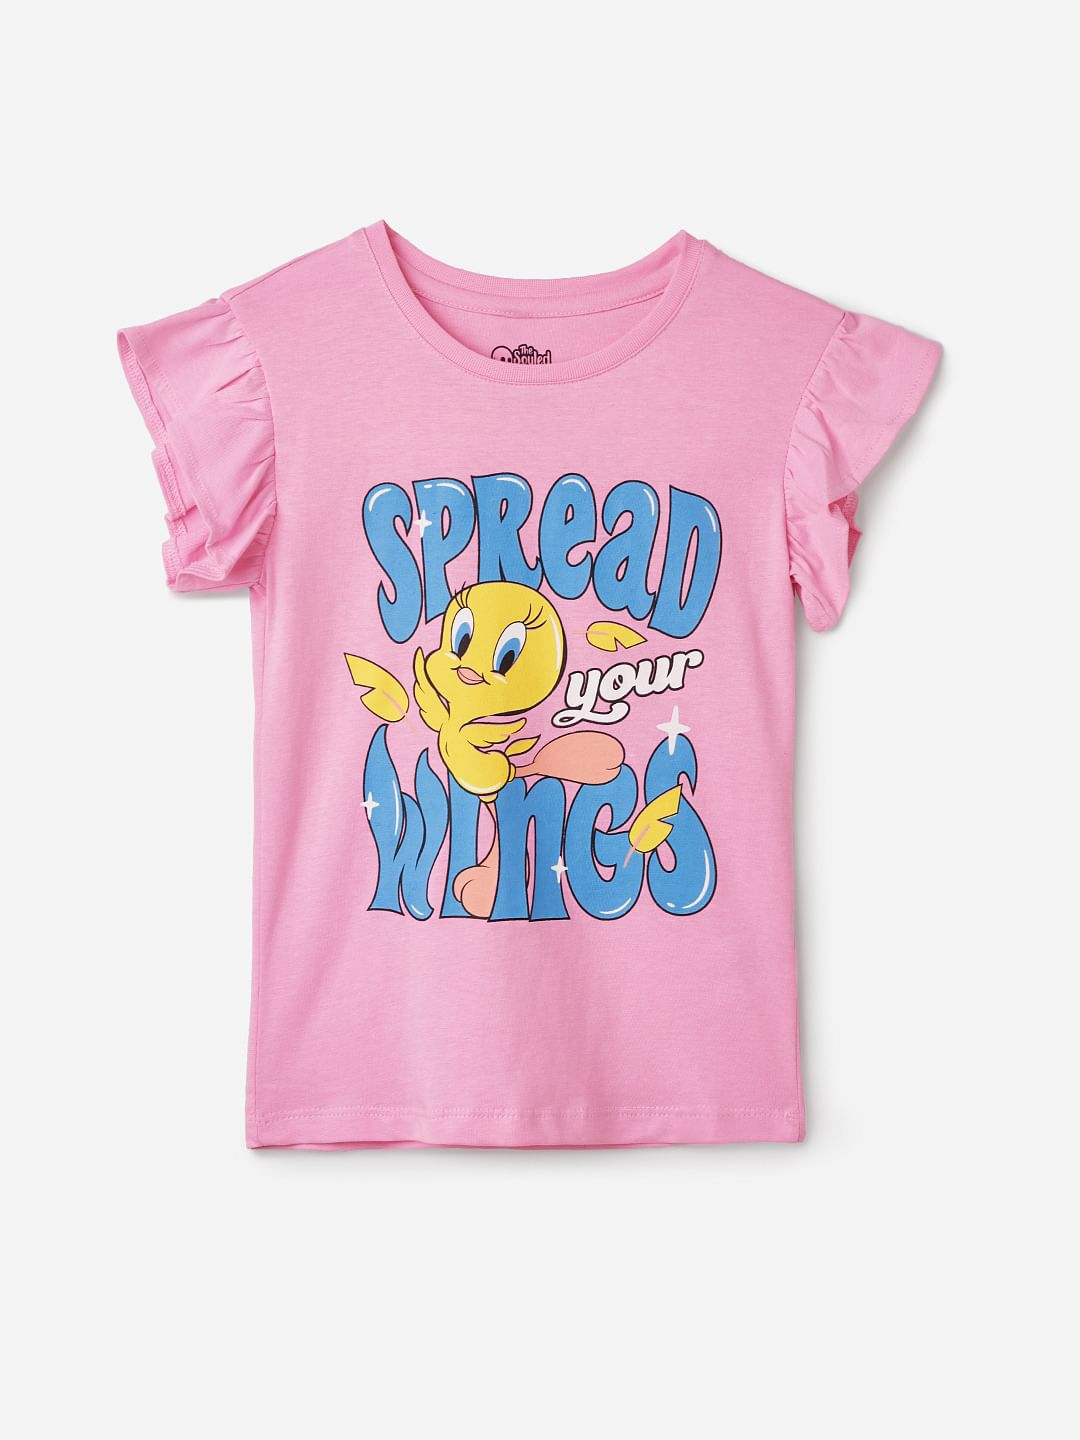 Girls Looney Tunes: Spread Your Wings Girls Cotton Flutter Sleeve Tops